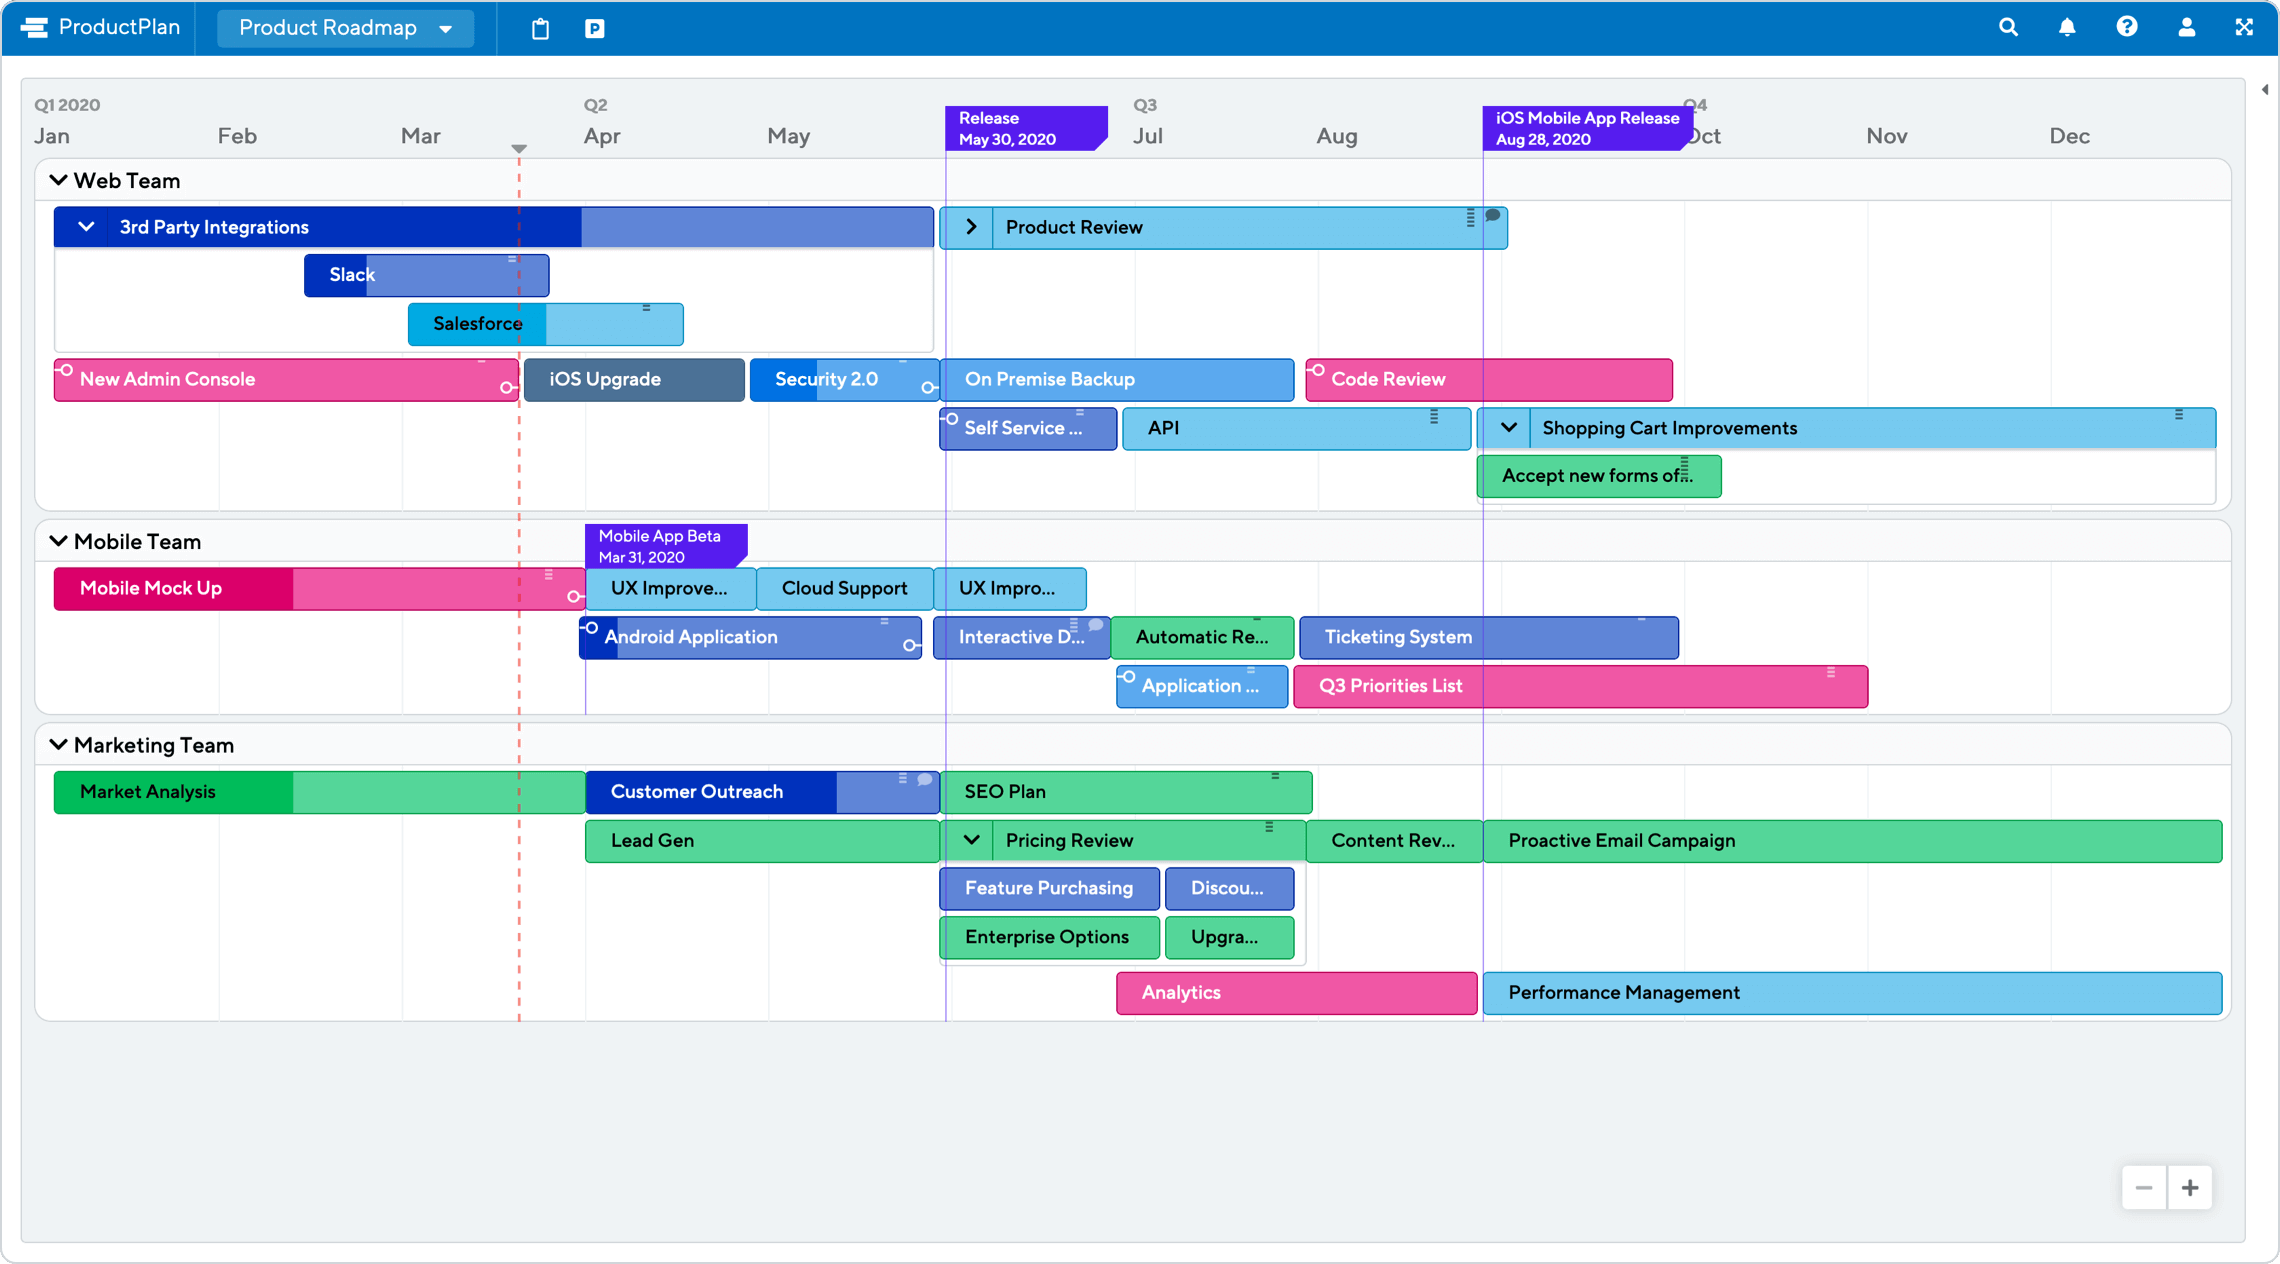 Product Roadmap Template by ProductPlan